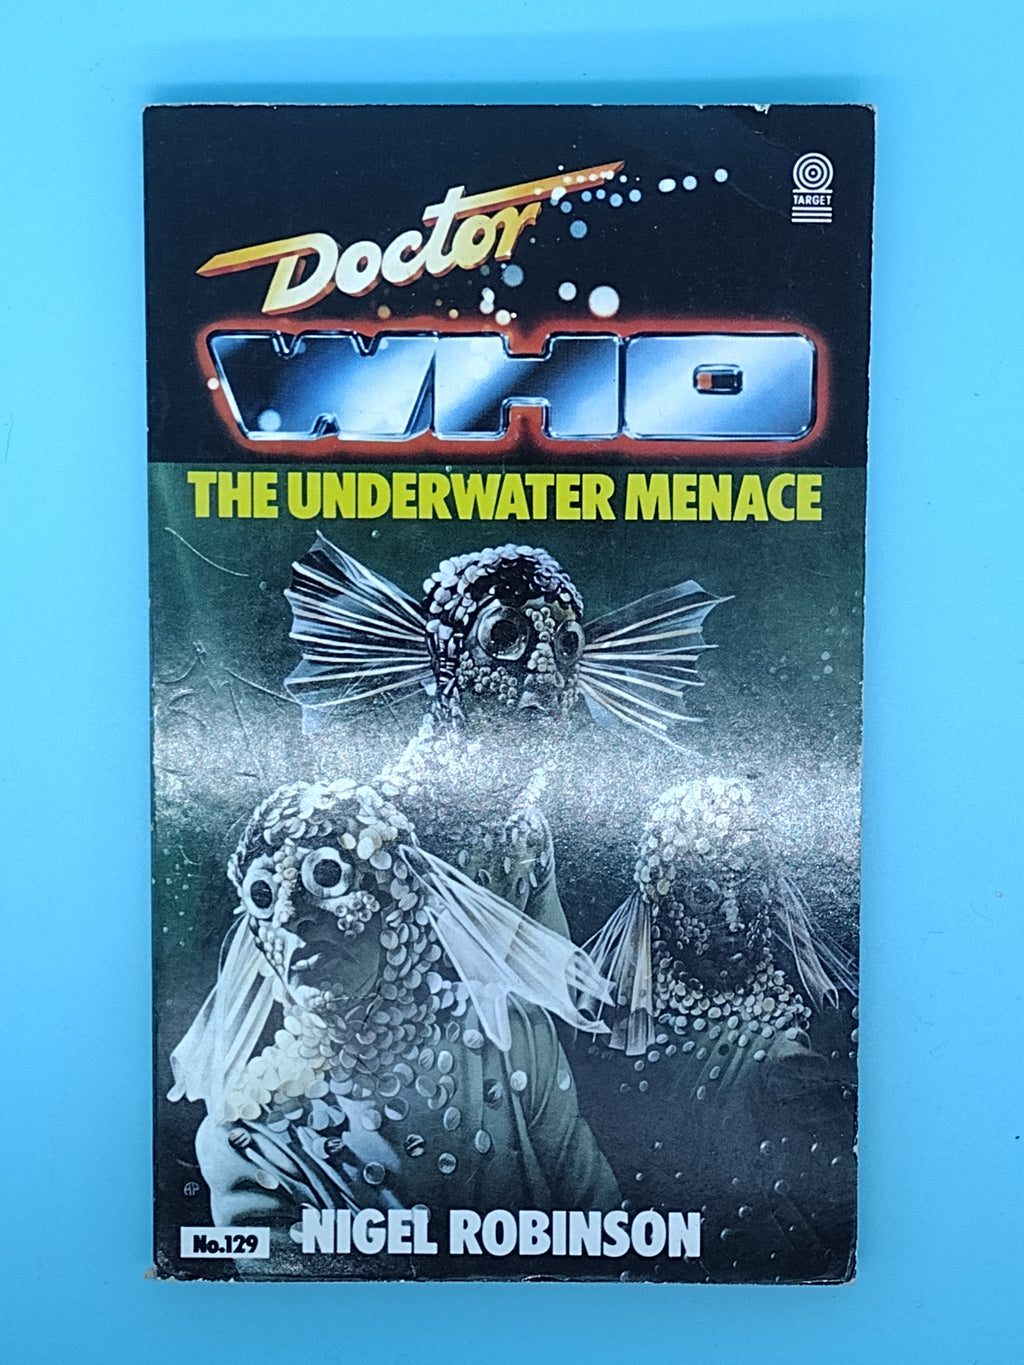 Doctor Who - The Underwater Menace - Target Book  by Nigel Robinson